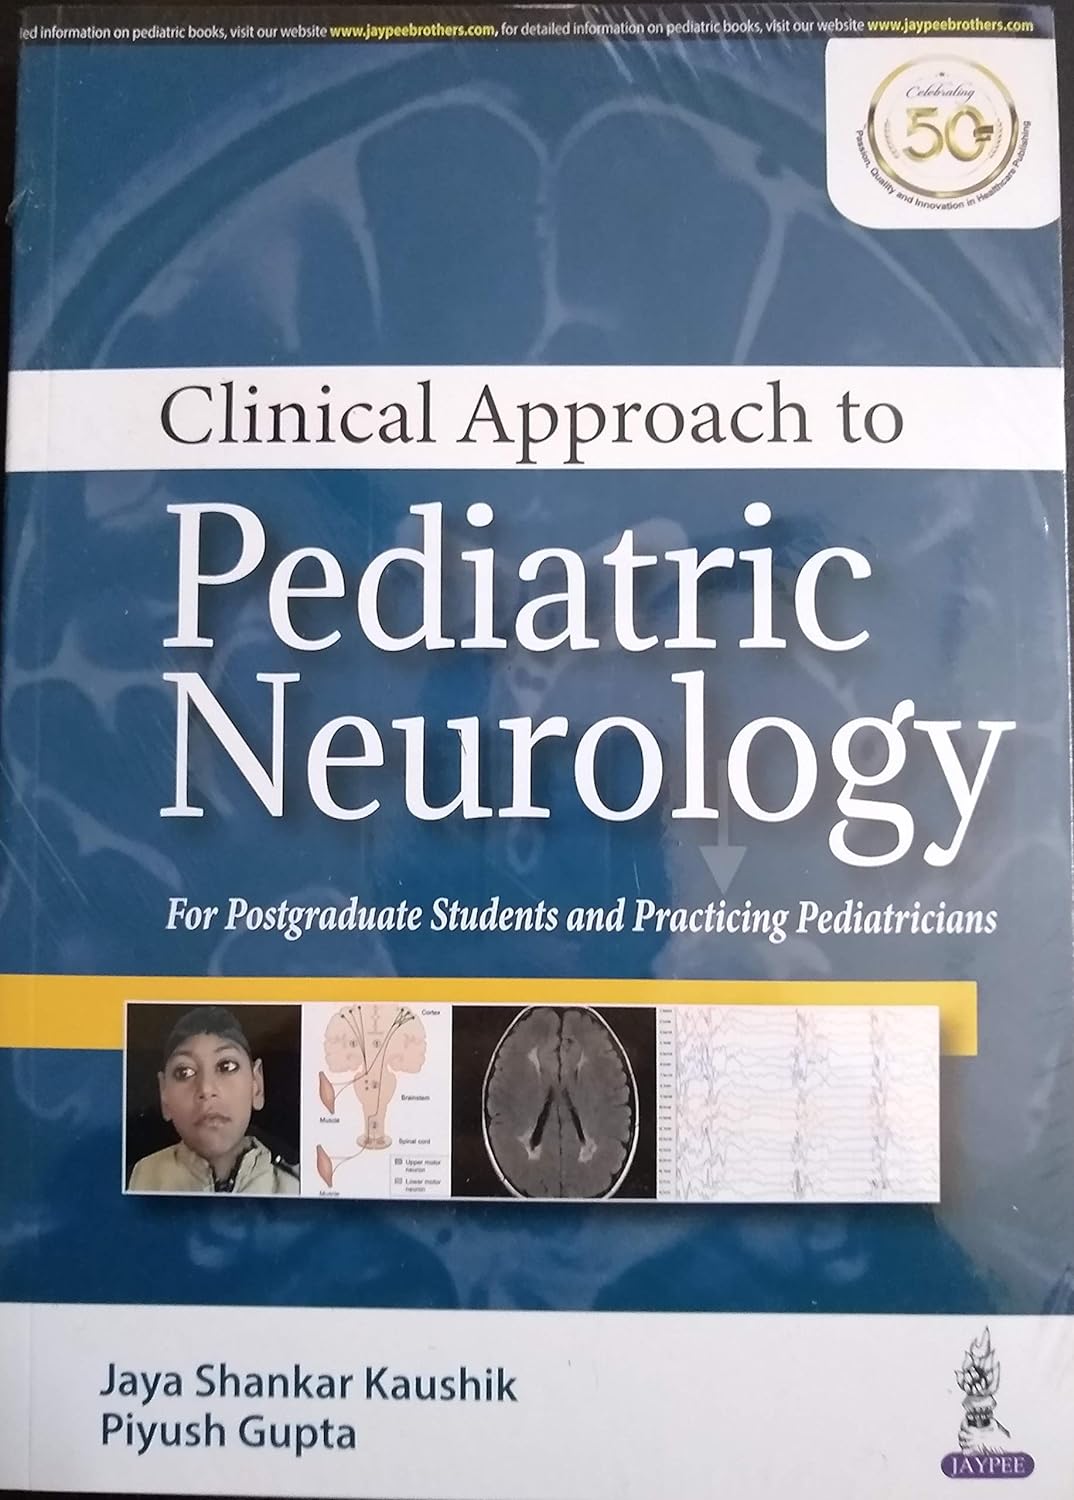 Clinical Approach to Pediatric Neurology: For Postgaduate Students and Practicing Pediatricians  by Jaya Shankar Kaushik 